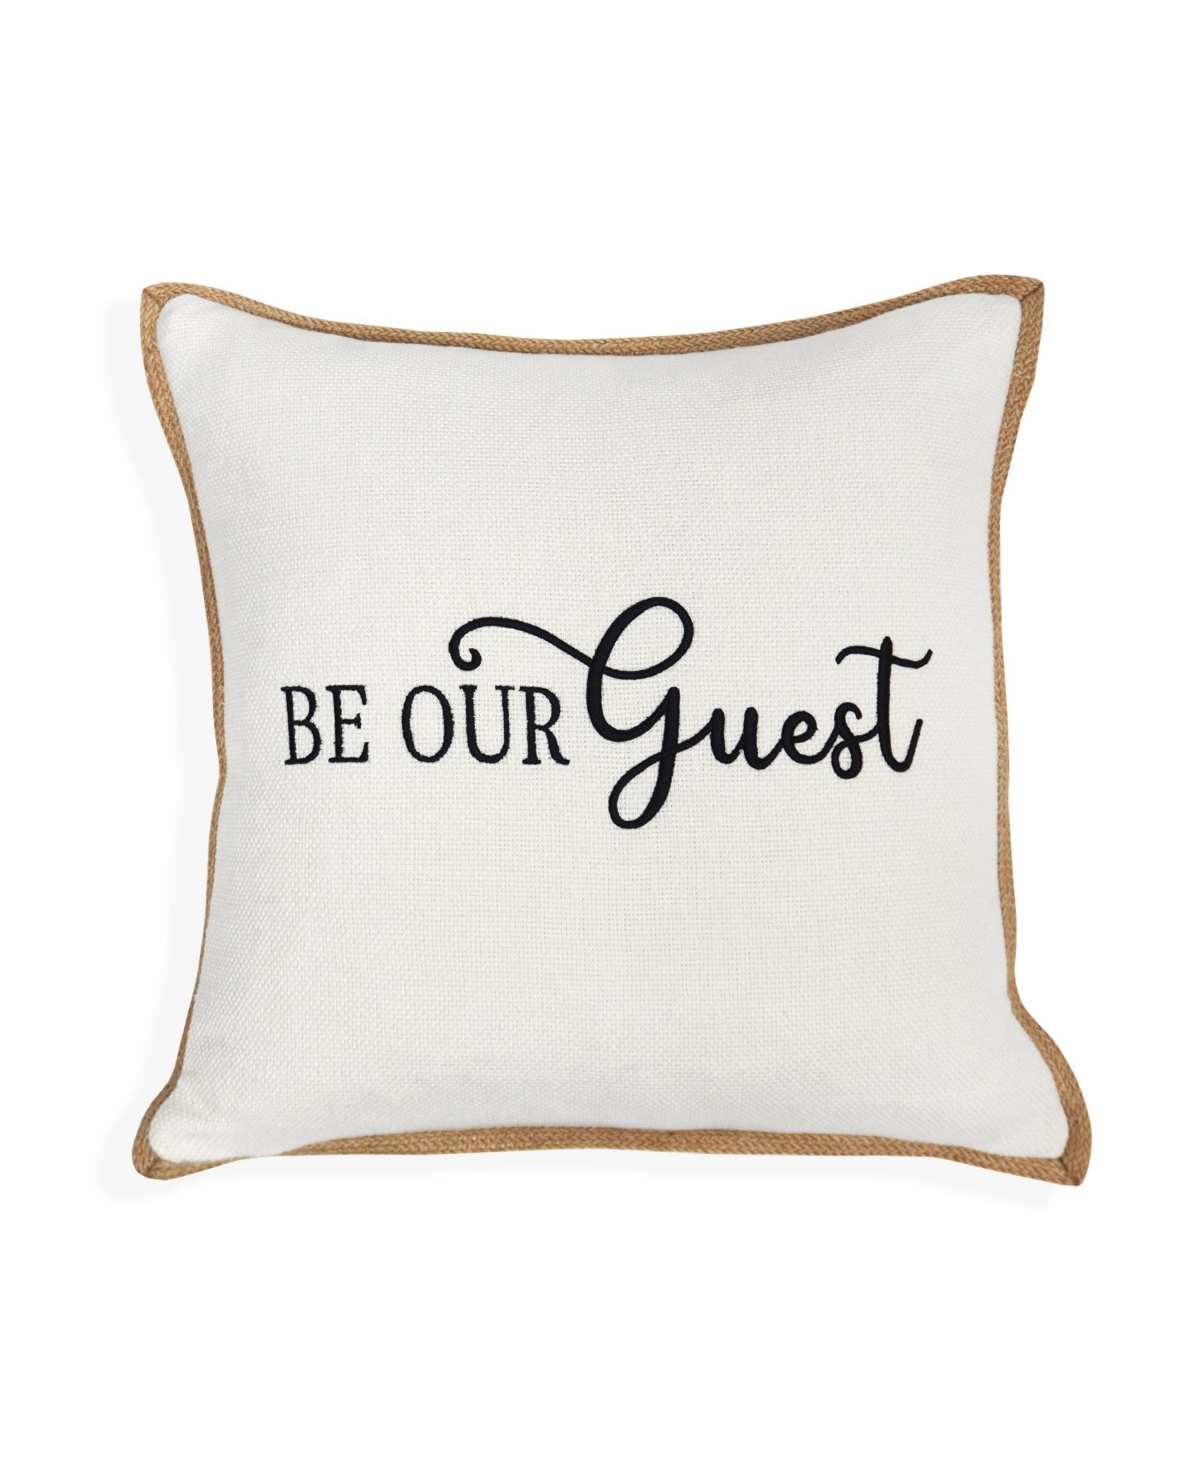 Millihome Be Our Guest Embroidery Linen Jute Decorative Pillow, 20" X 20" In Ivory